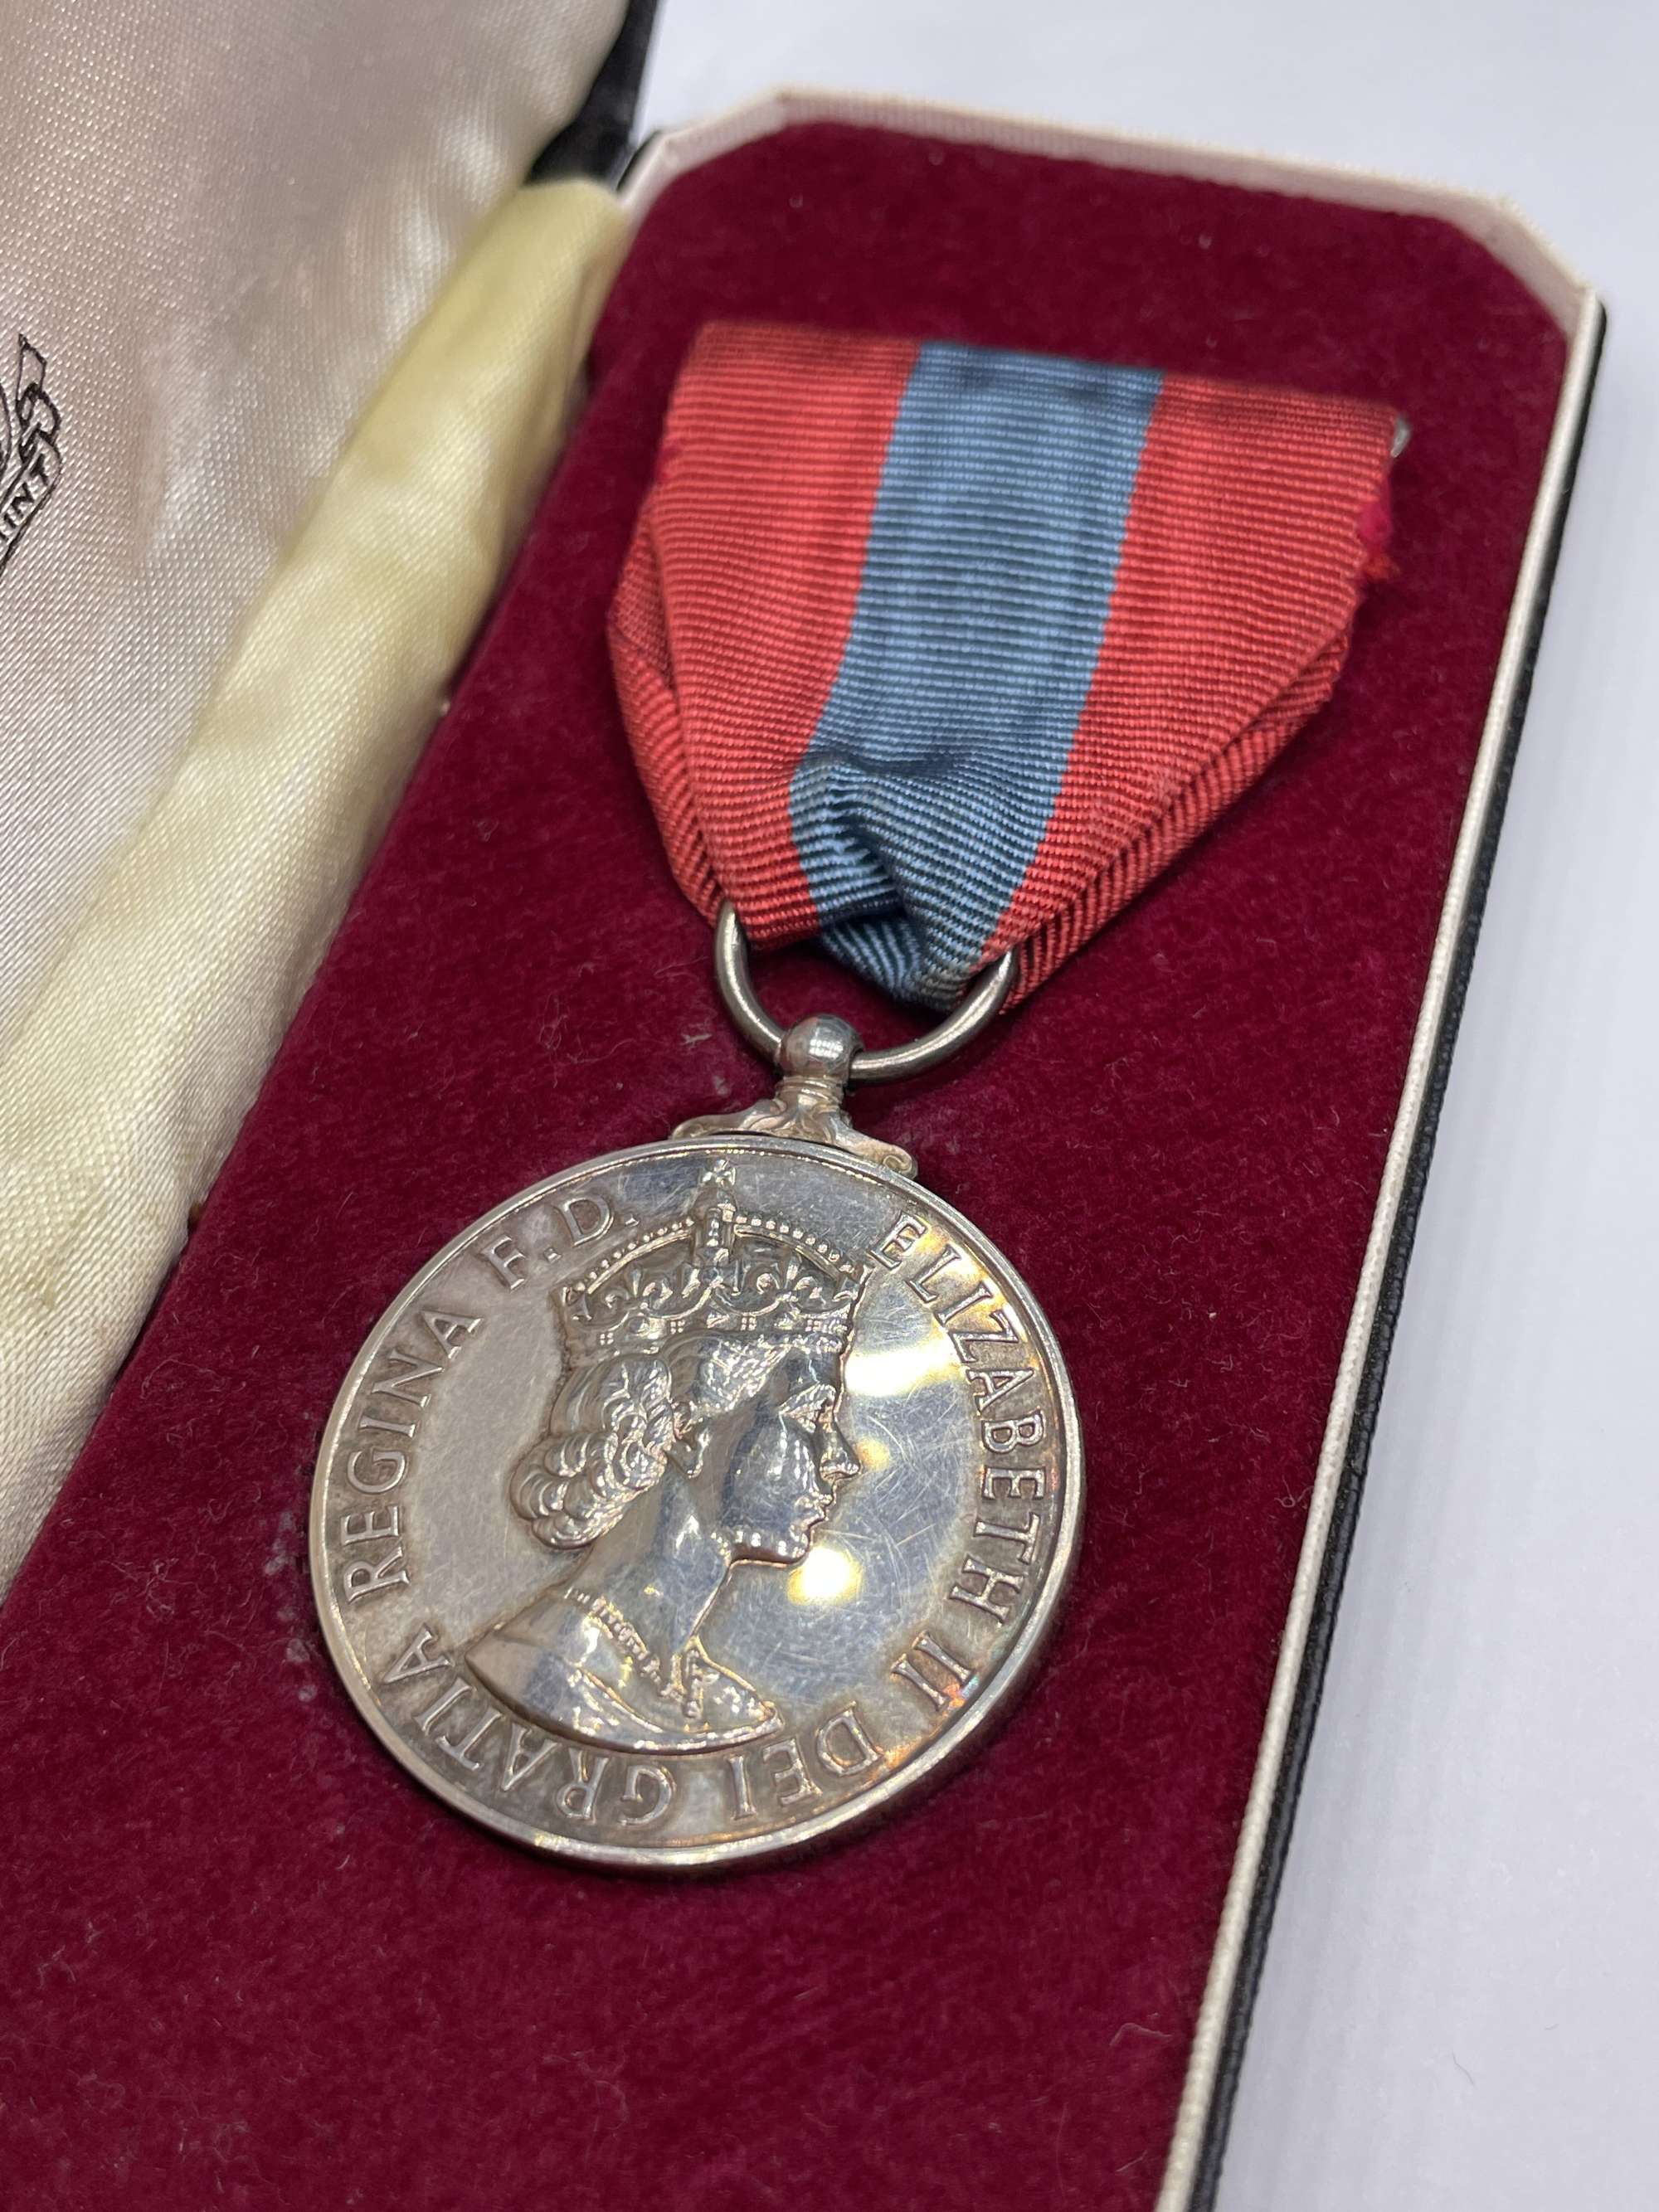 Original Imperial Service Medal, Edith Hunt, Boxed, ERII